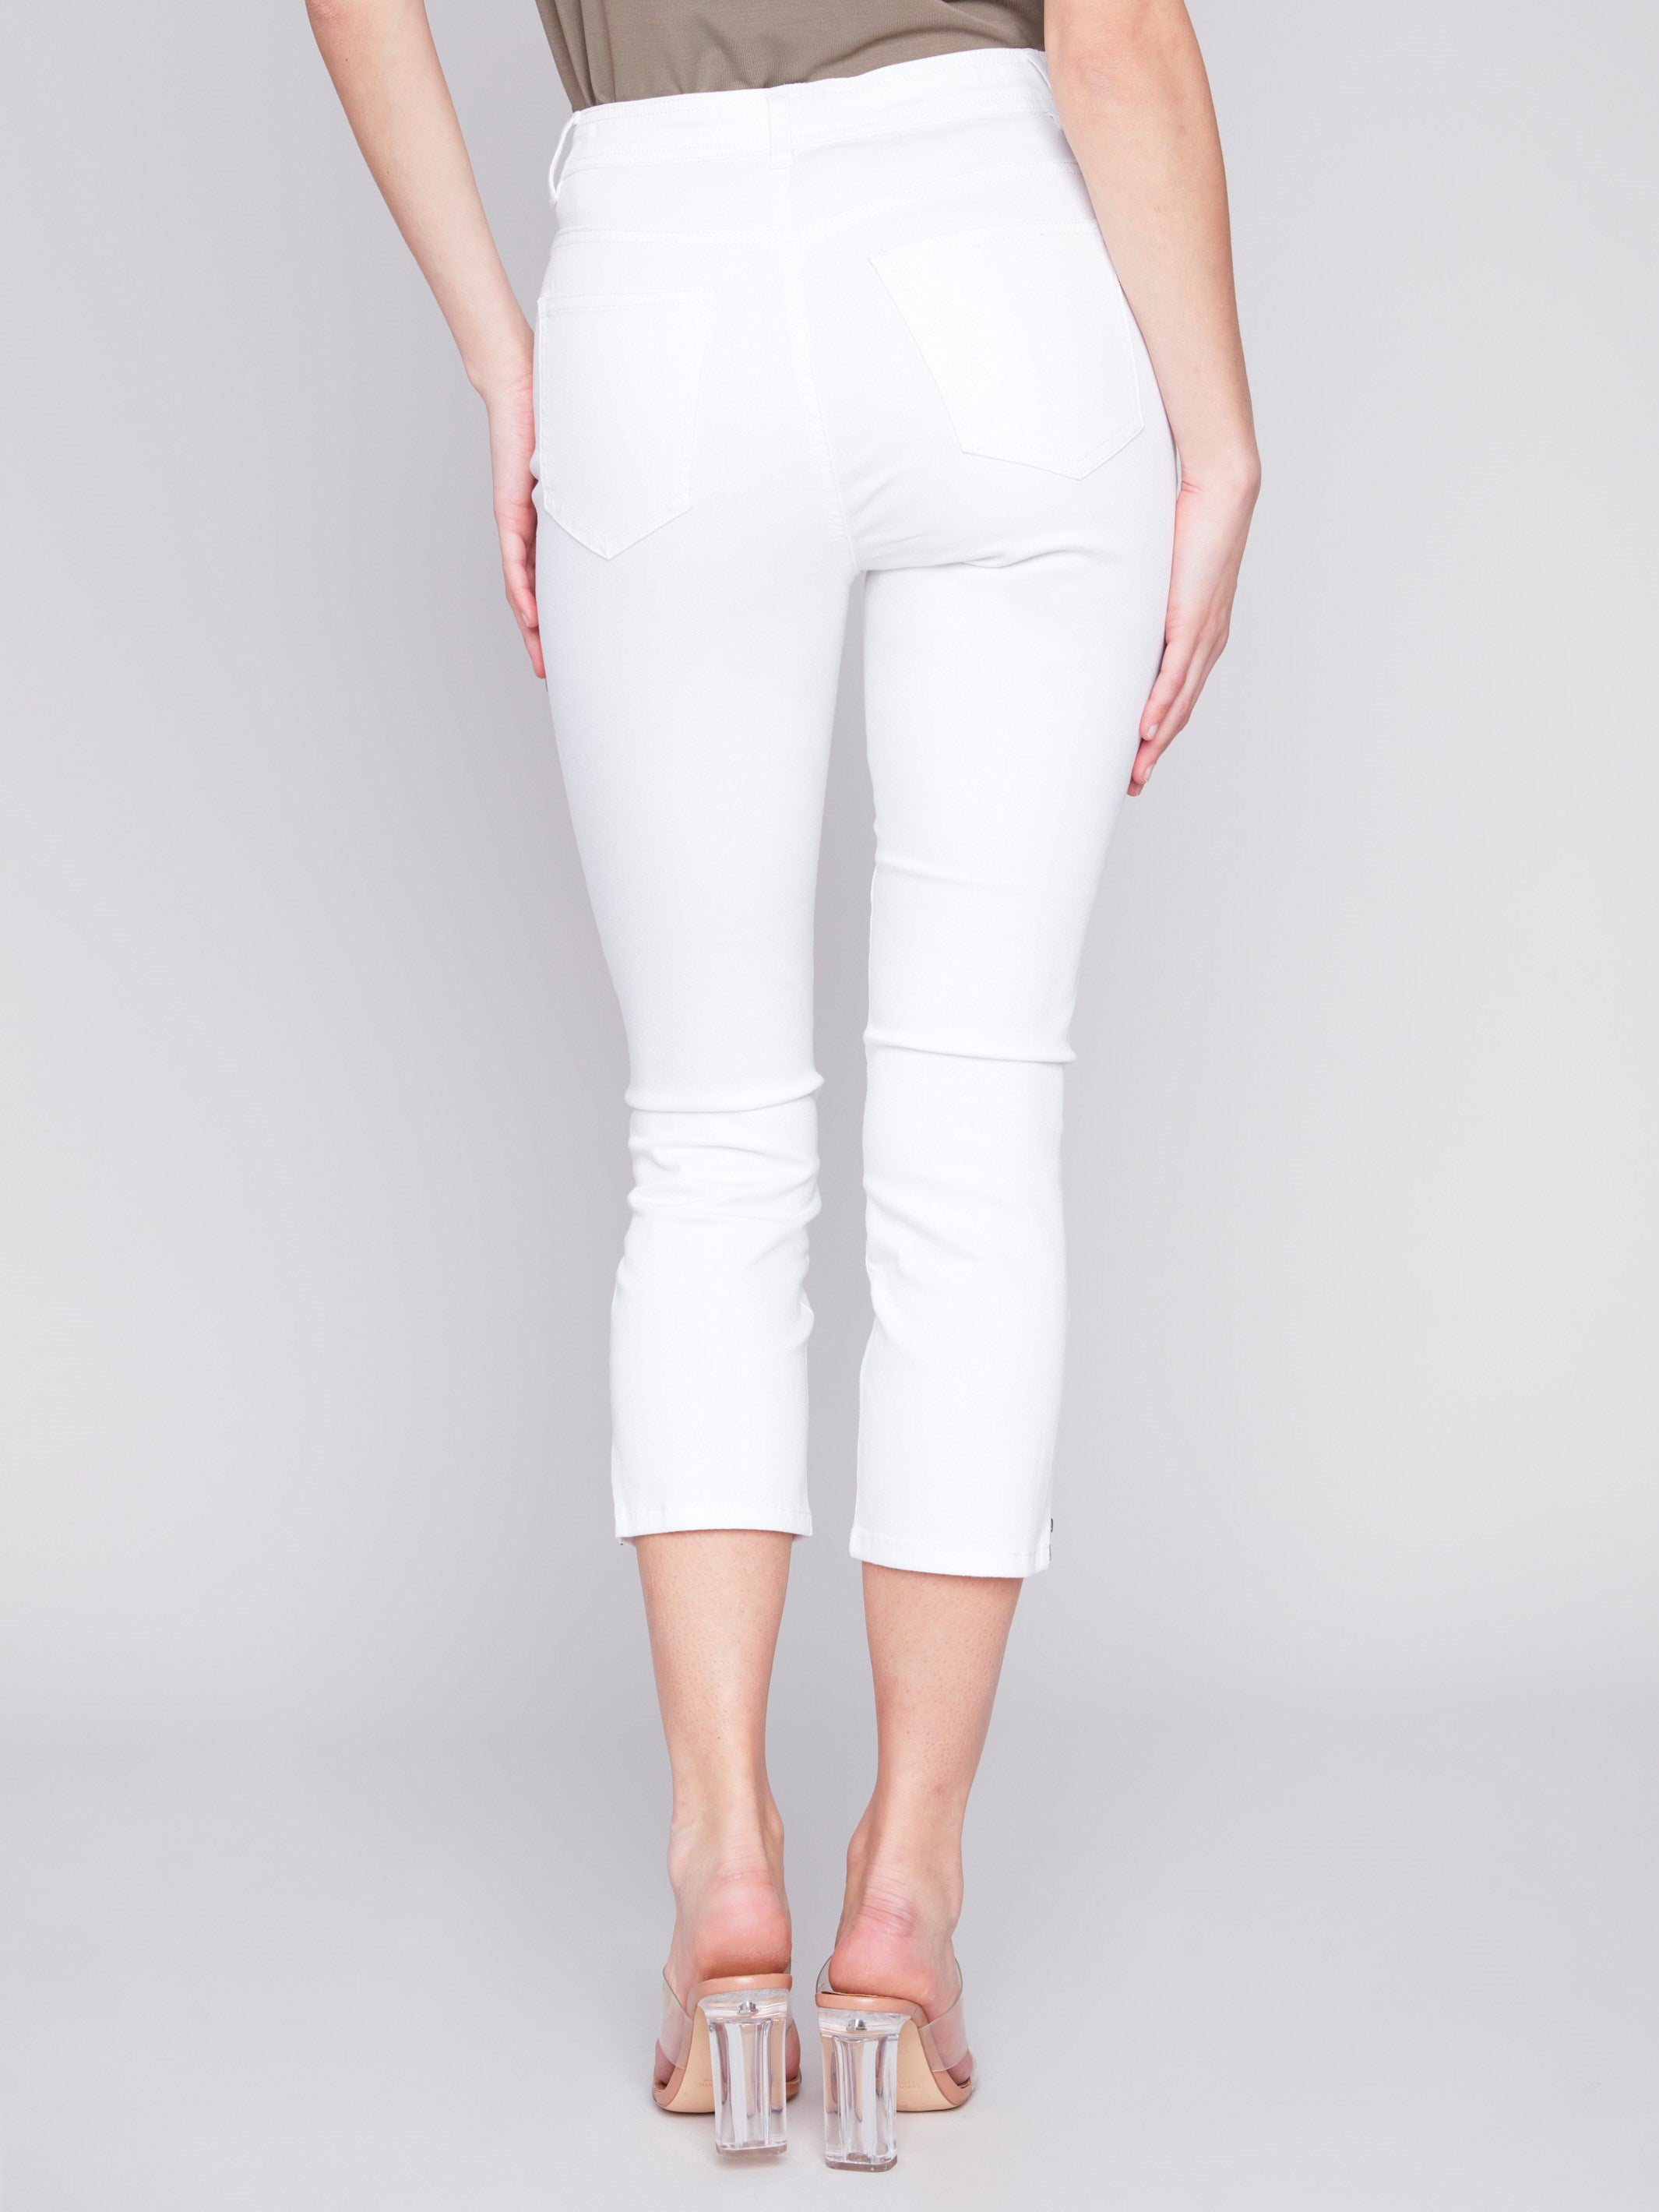 Charlie B Cropped Twill Pants with Zipper Detail - White - Image 3